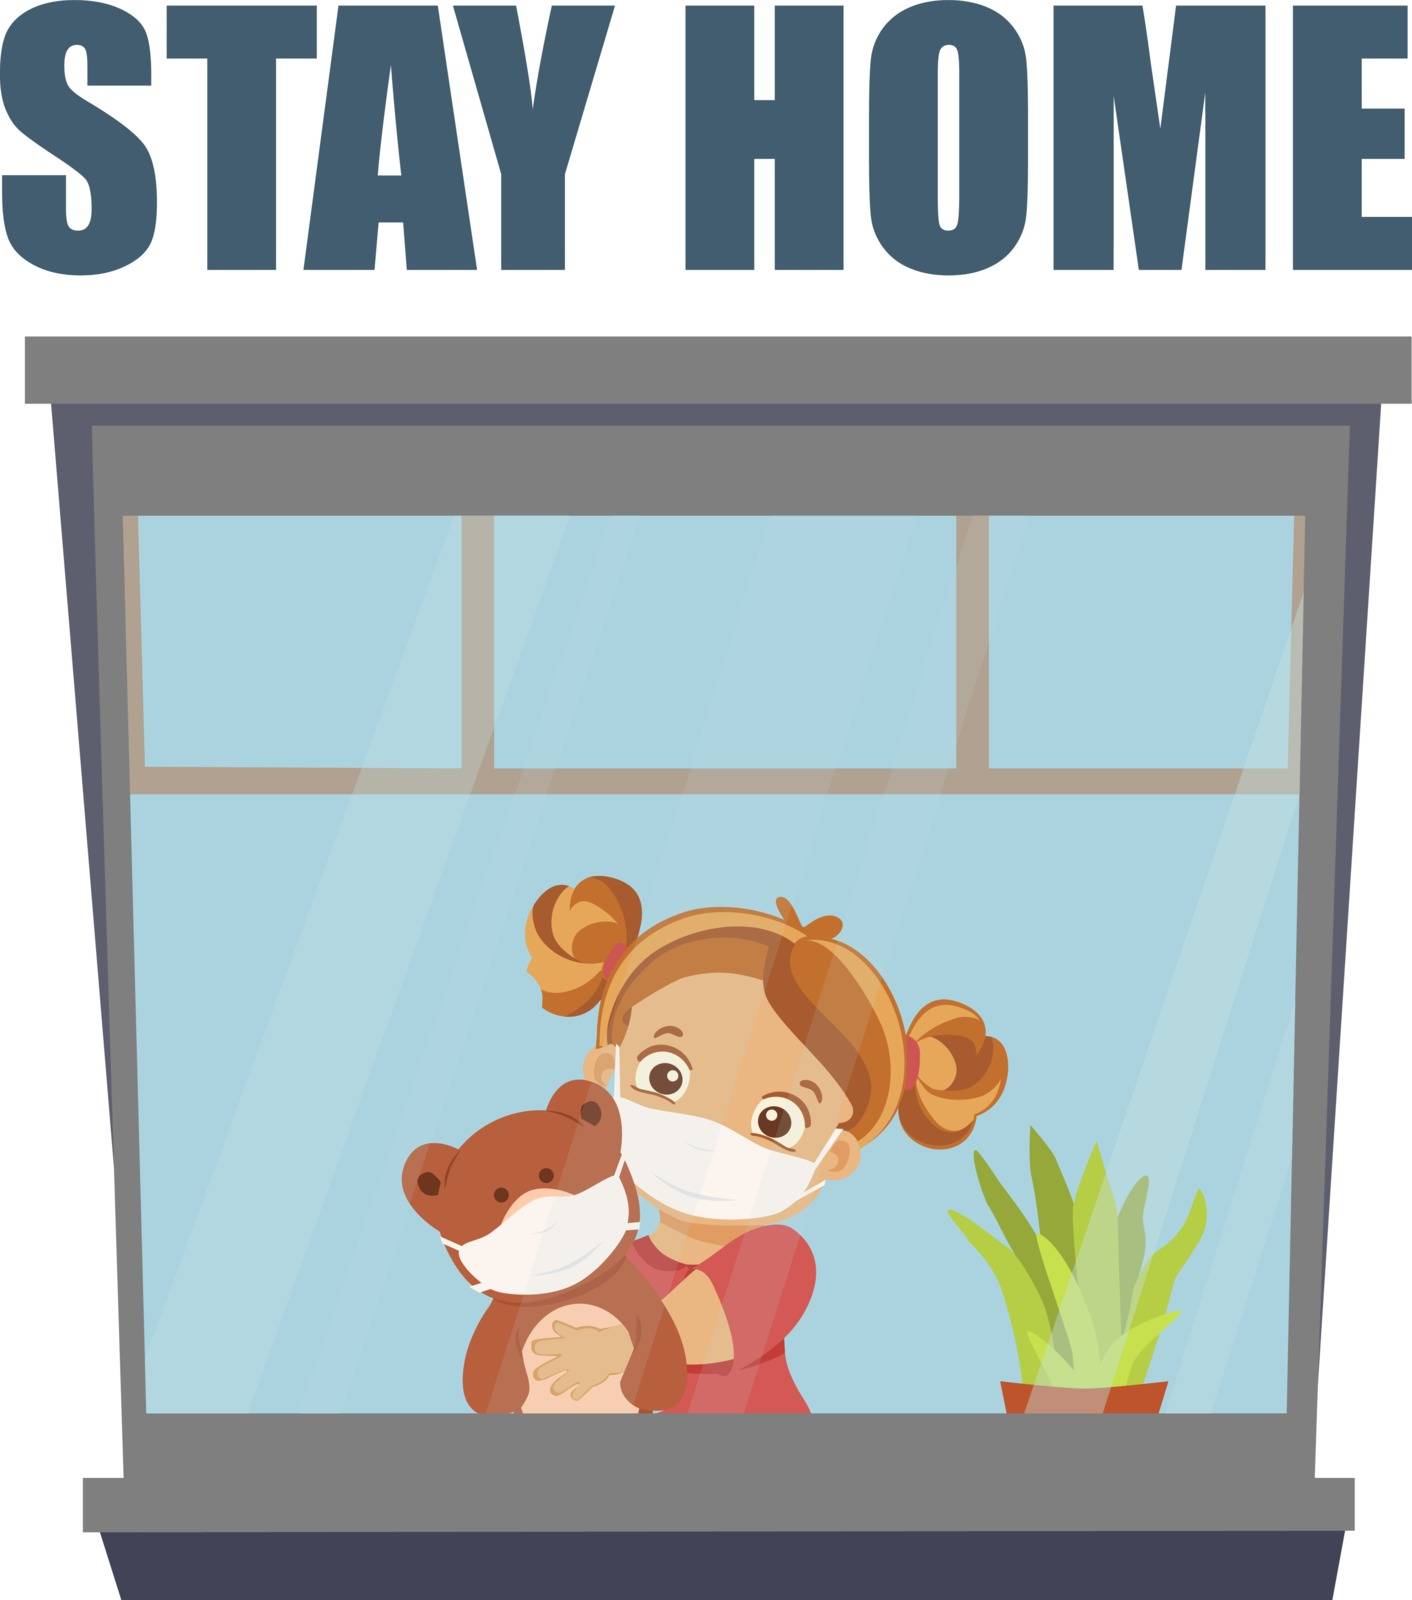 Stay home during the epidemic. Sad girl looks out the window. Vector illustration.